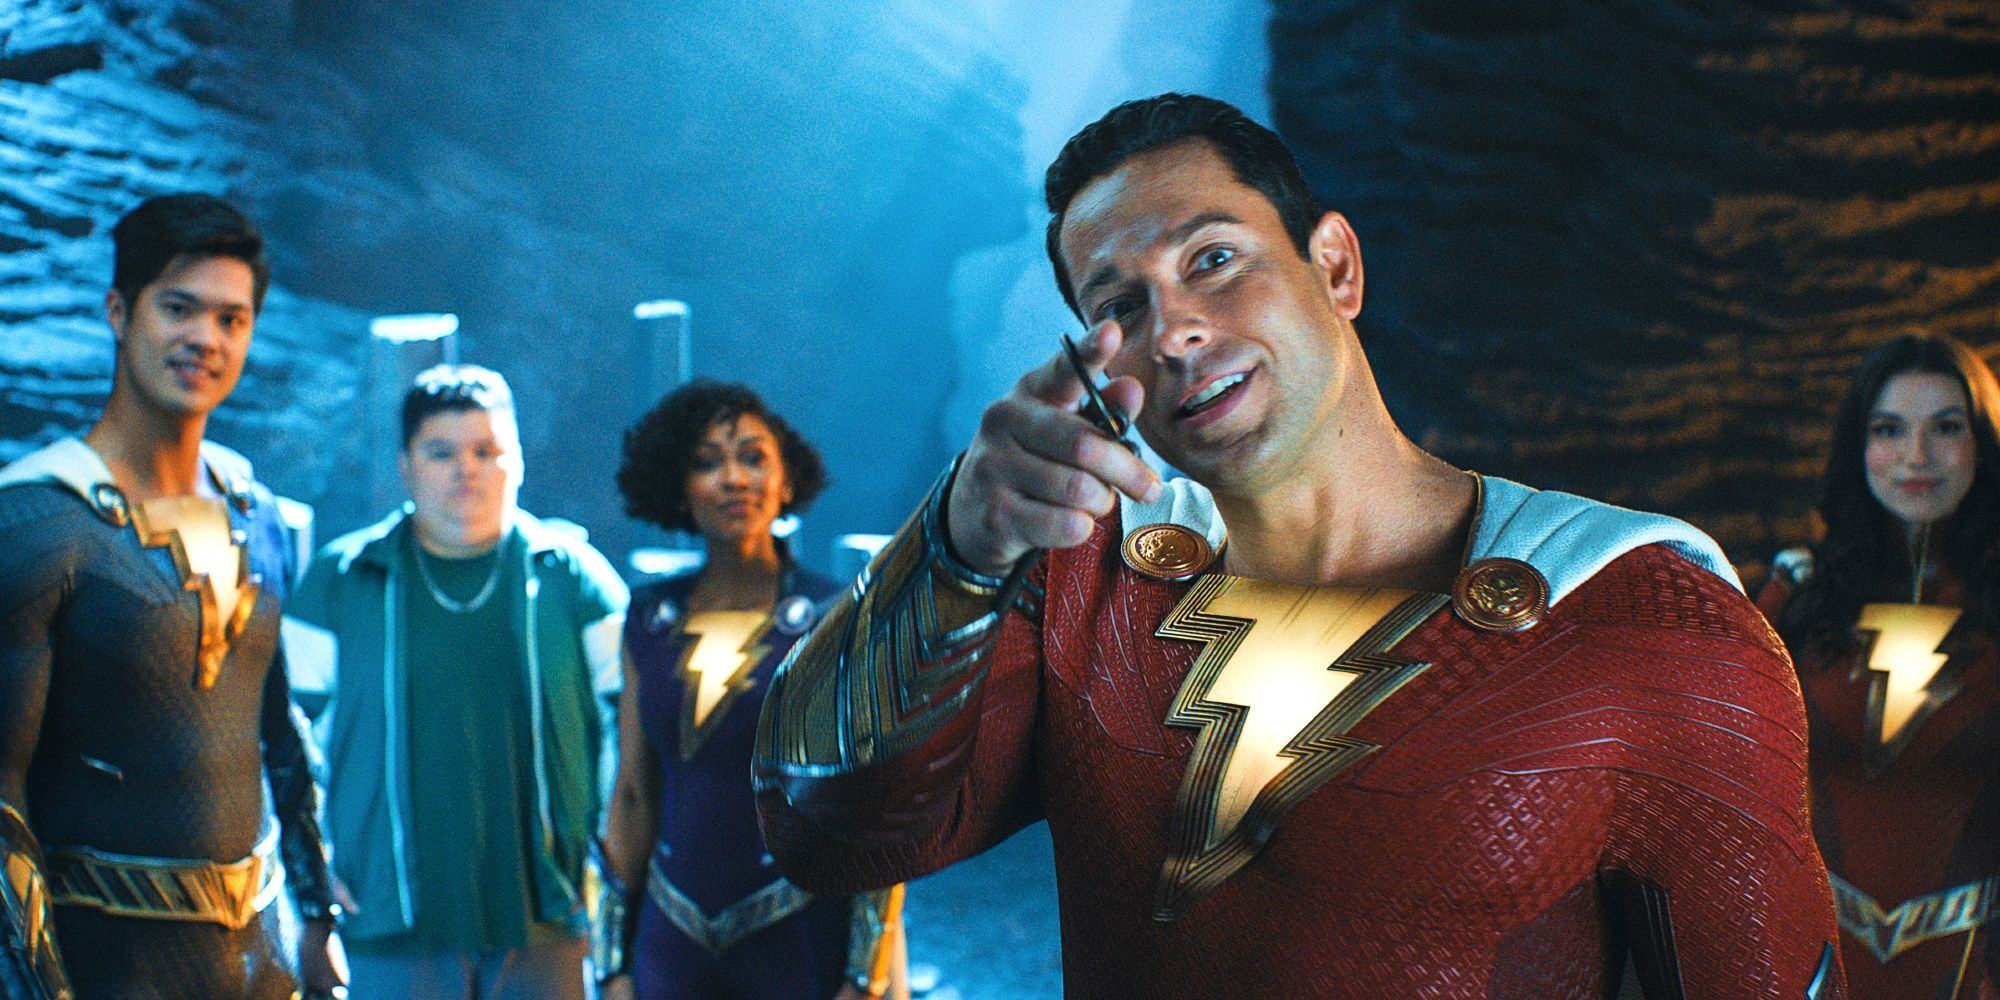 Ross Butler as Eugene Choi, Jovan Armand Pedro Pena, Meagan Good as Darla Dudley, Zachary Levi as Billy Batson, Grace Fulton as Mary Bromfield, in the cave of Shazam 2 Wrath of Gods